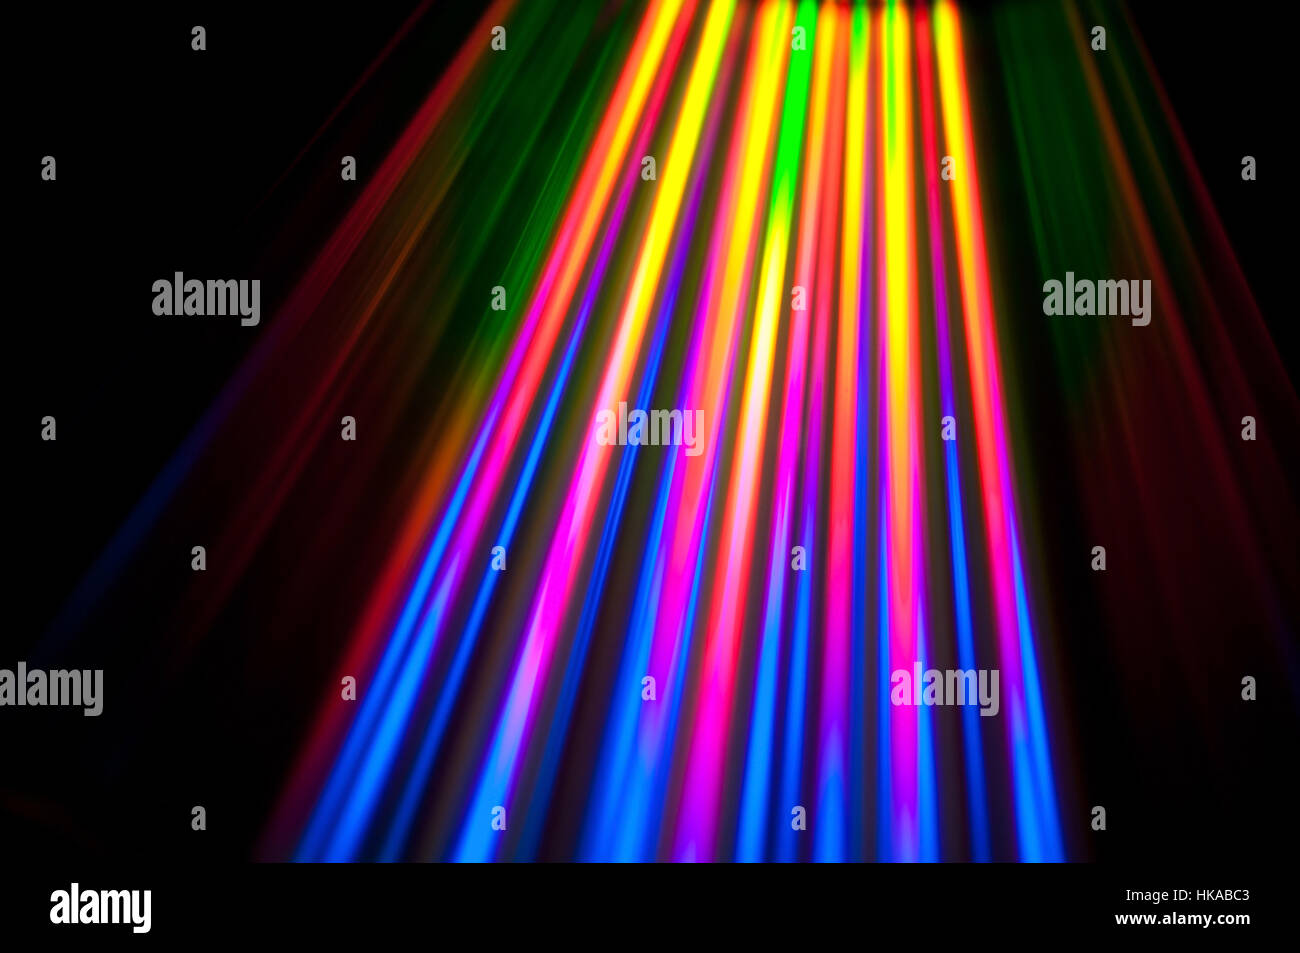 Light reflects from the surface of a cd. Stock Photo